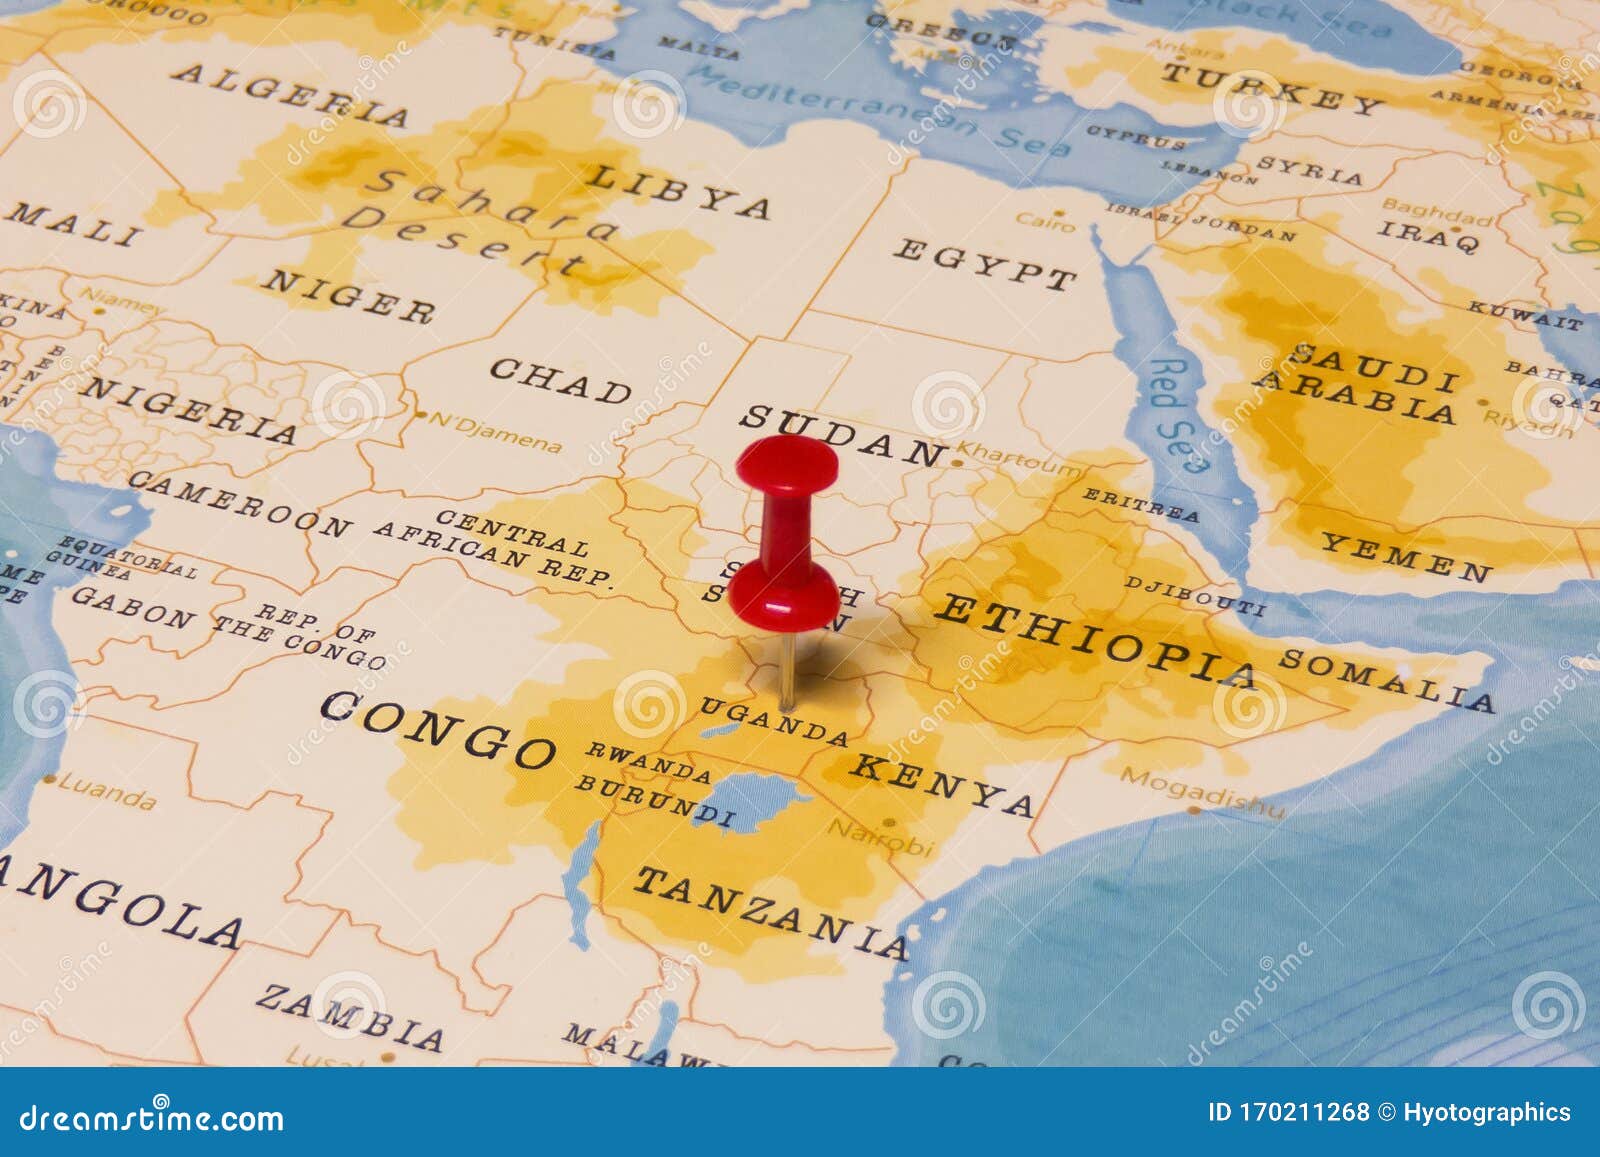 A Red Pin On Uganda Of The World Map Stock Photo - Image of paper, crime: 170211268